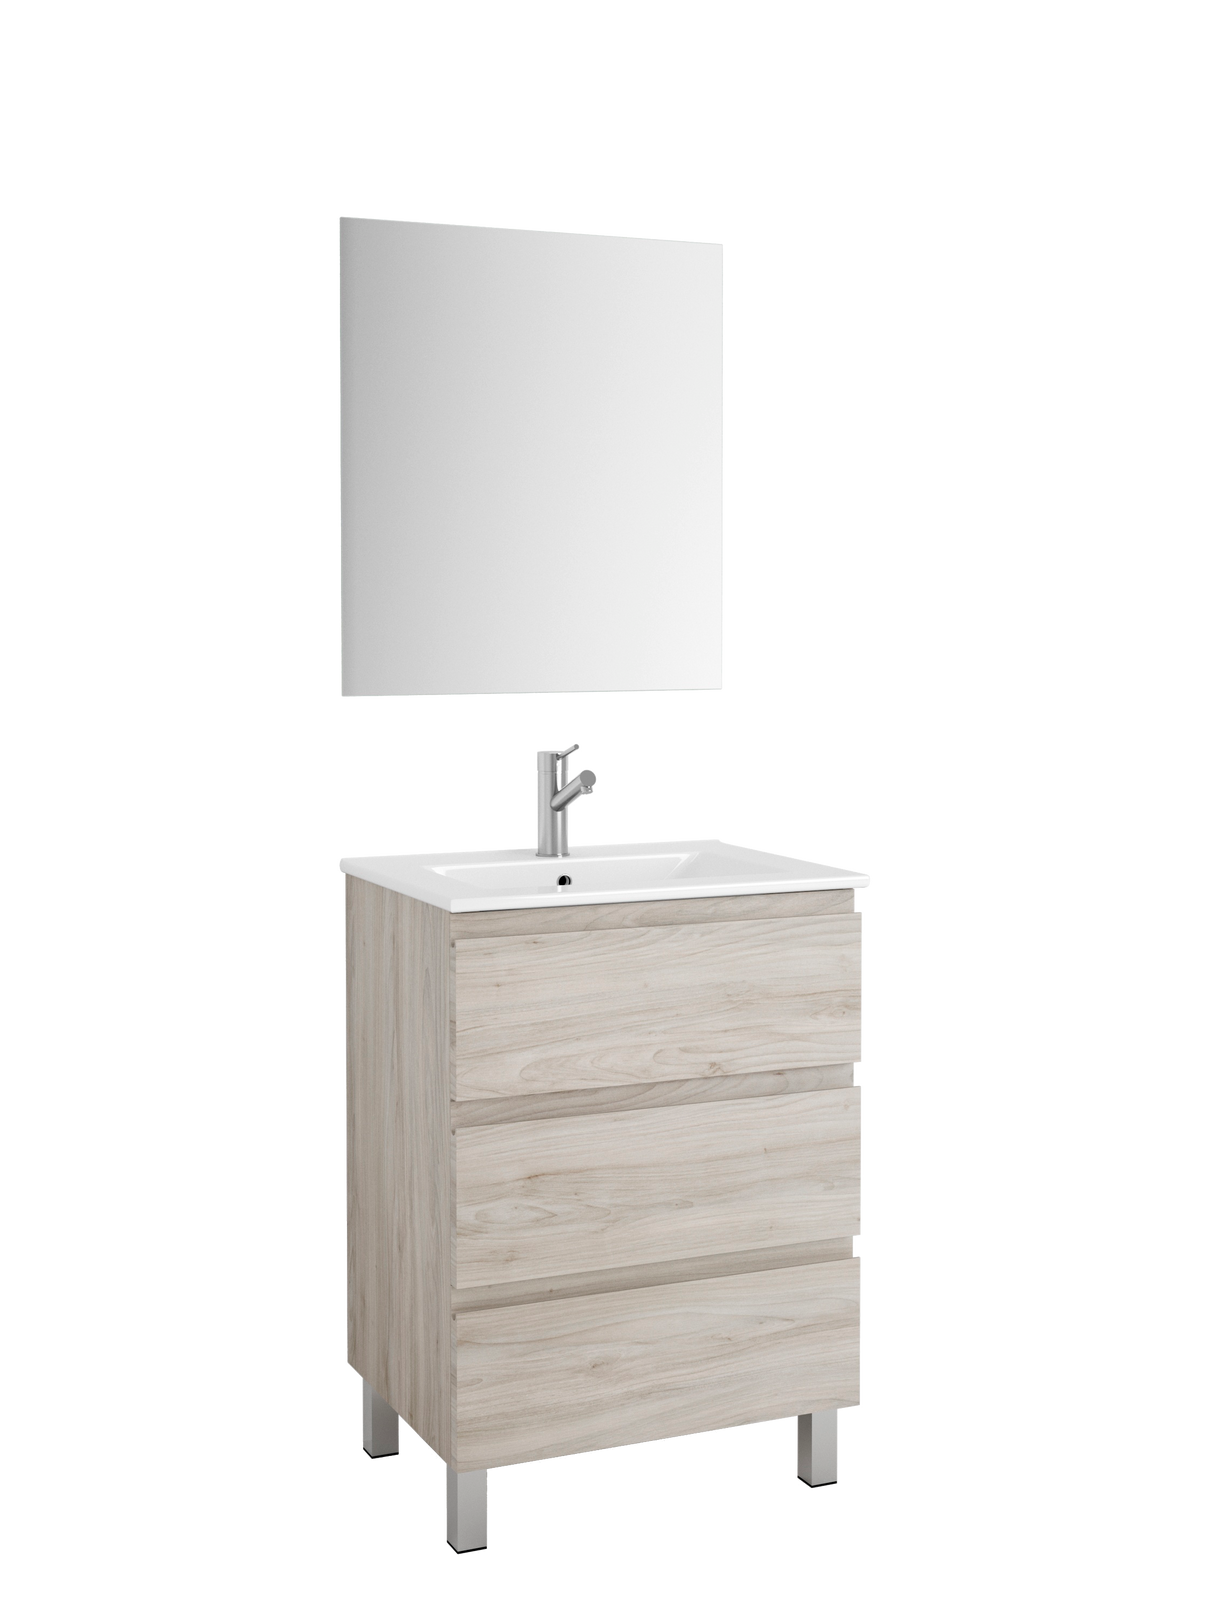 DAX Costa Engineered Wood and Vanity Cabinet with Porcelain Onix Basin, 24", Pine DAX-COS012412-ONX